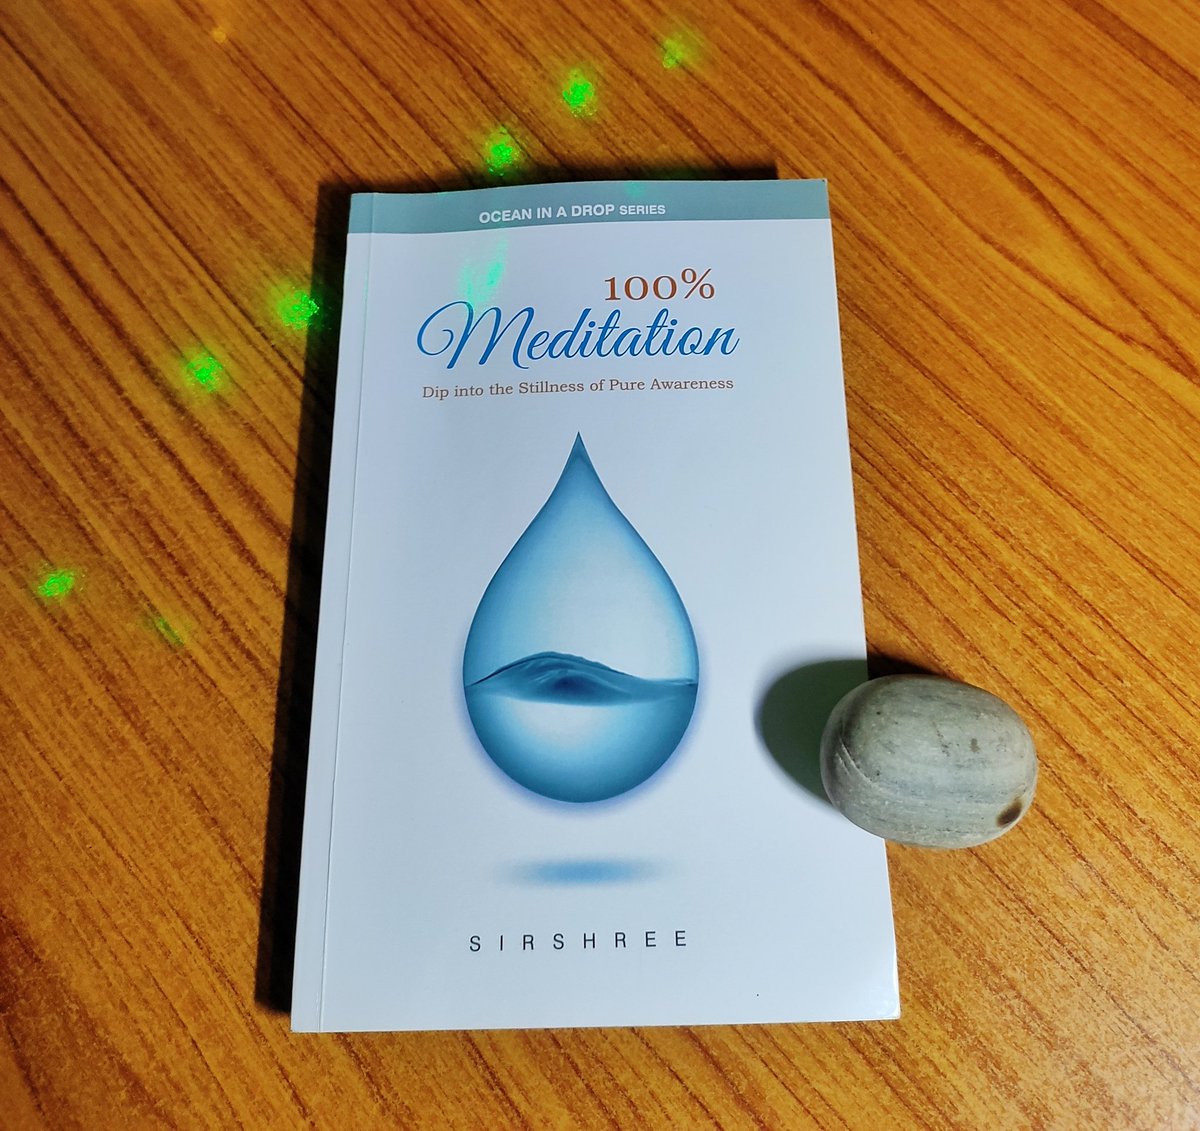 Completed 'Meditation' by @Sirshree. It's an amazing book, divided into 10 short chapters. The content is in a Q&A format, covering almost all the doubts that arise in our minds related to meditation. It's highly recommended for beginners who want to start the journey